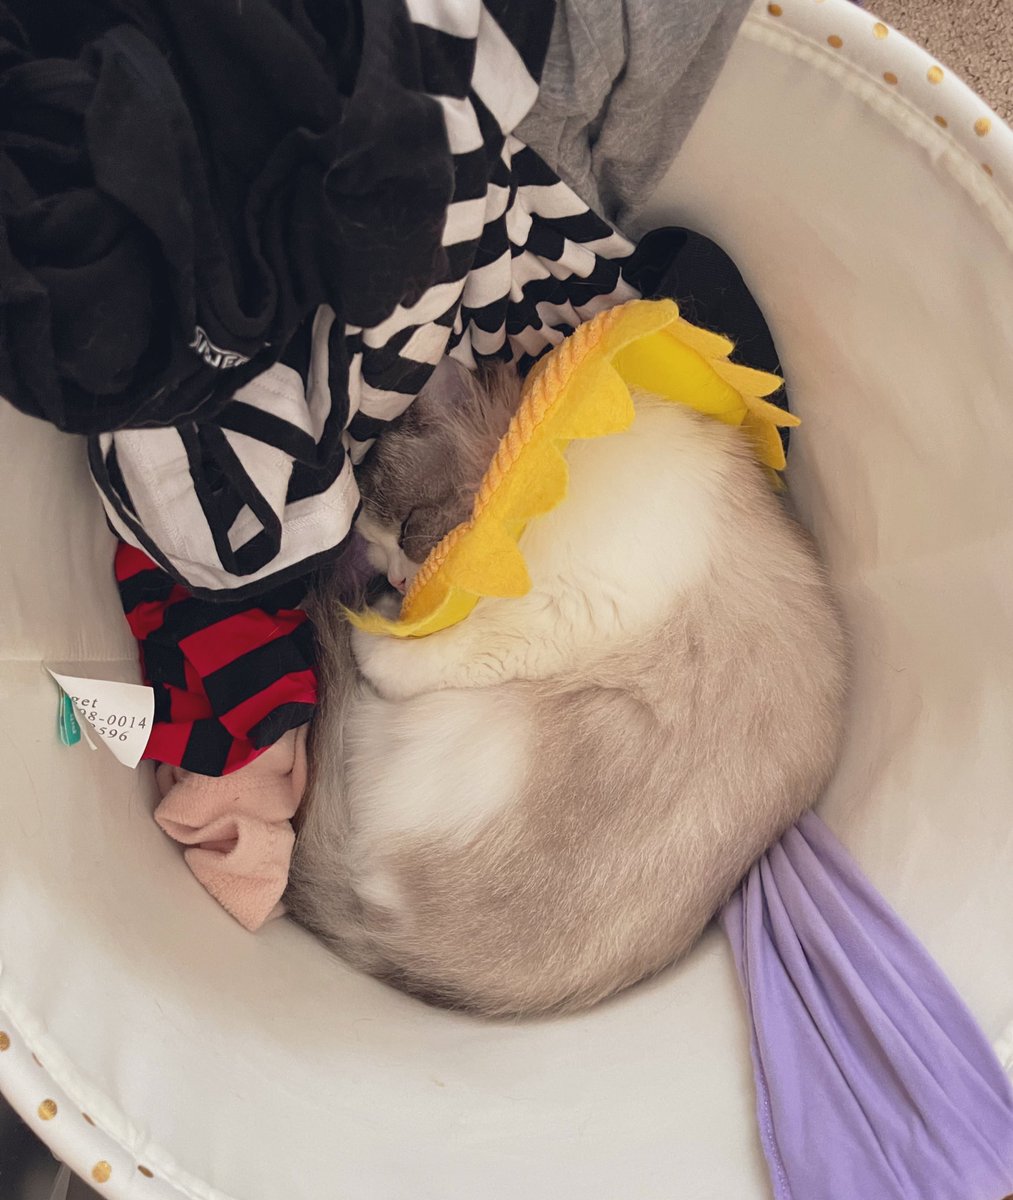 「Guess my laundry is hers now 」|Ashley Nicholsのイラスト